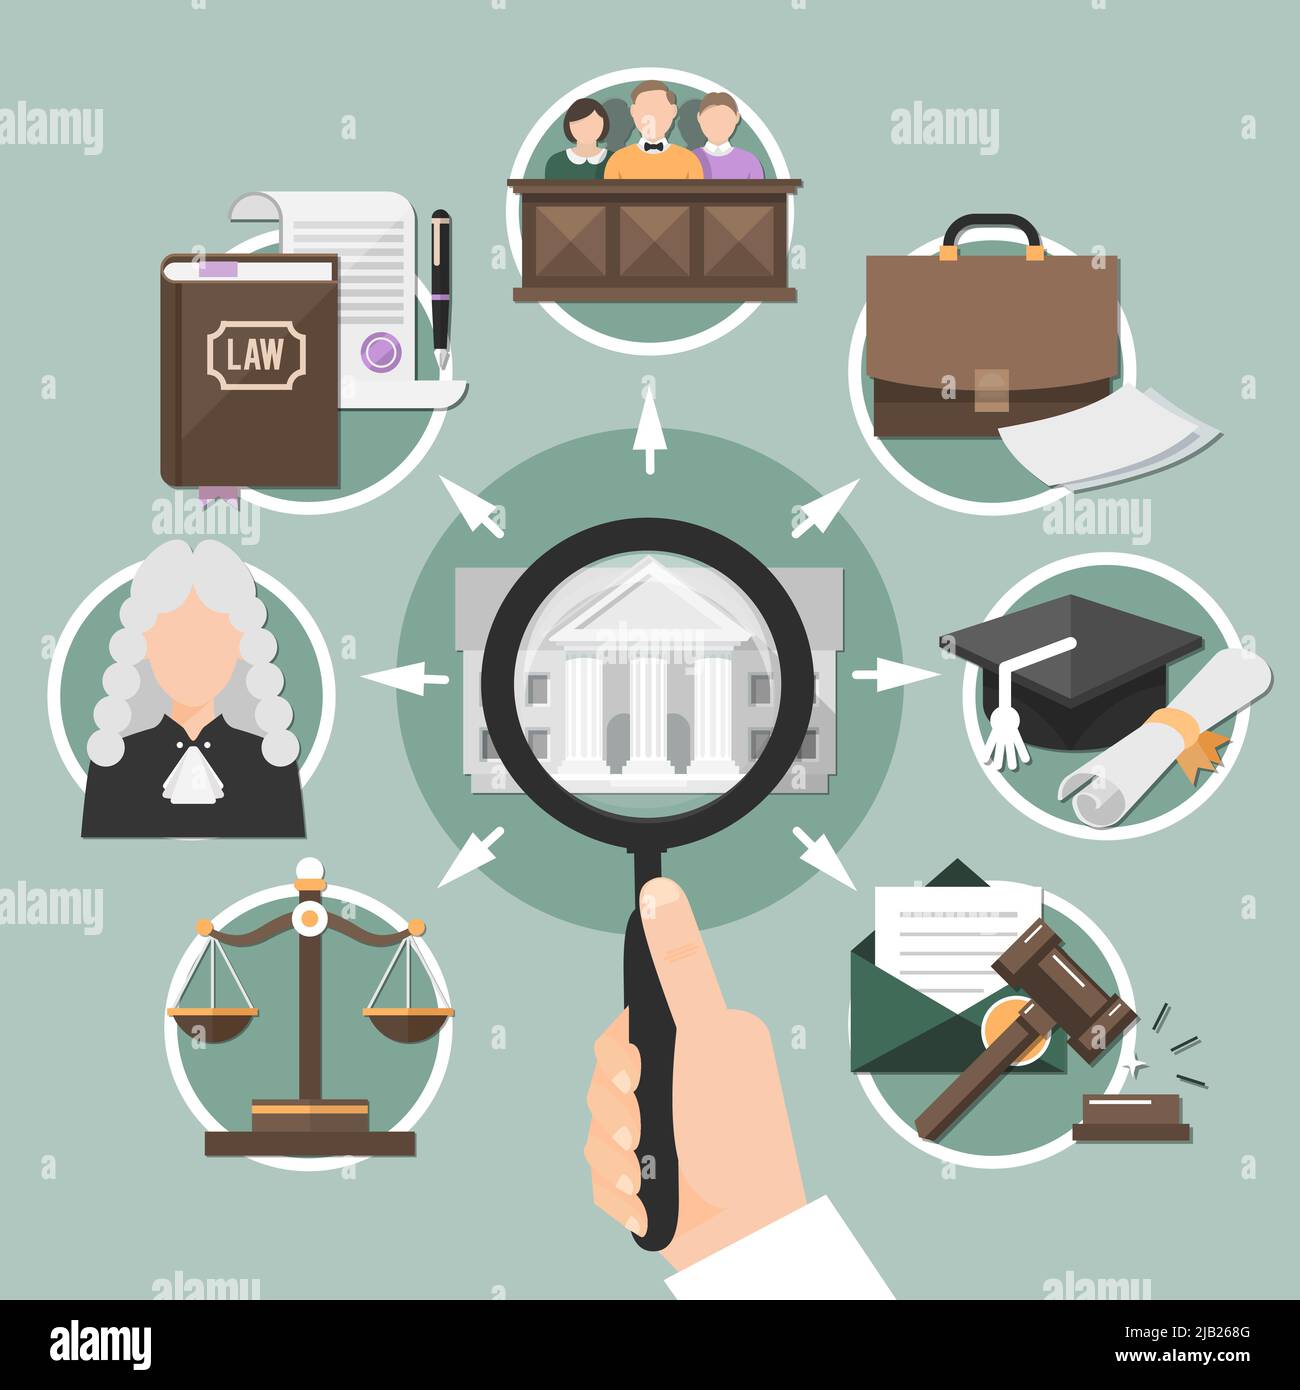 Law conceptual round composition of flat legal system icons and hand with magnifying lens and arrows vector illustration Stock Vector